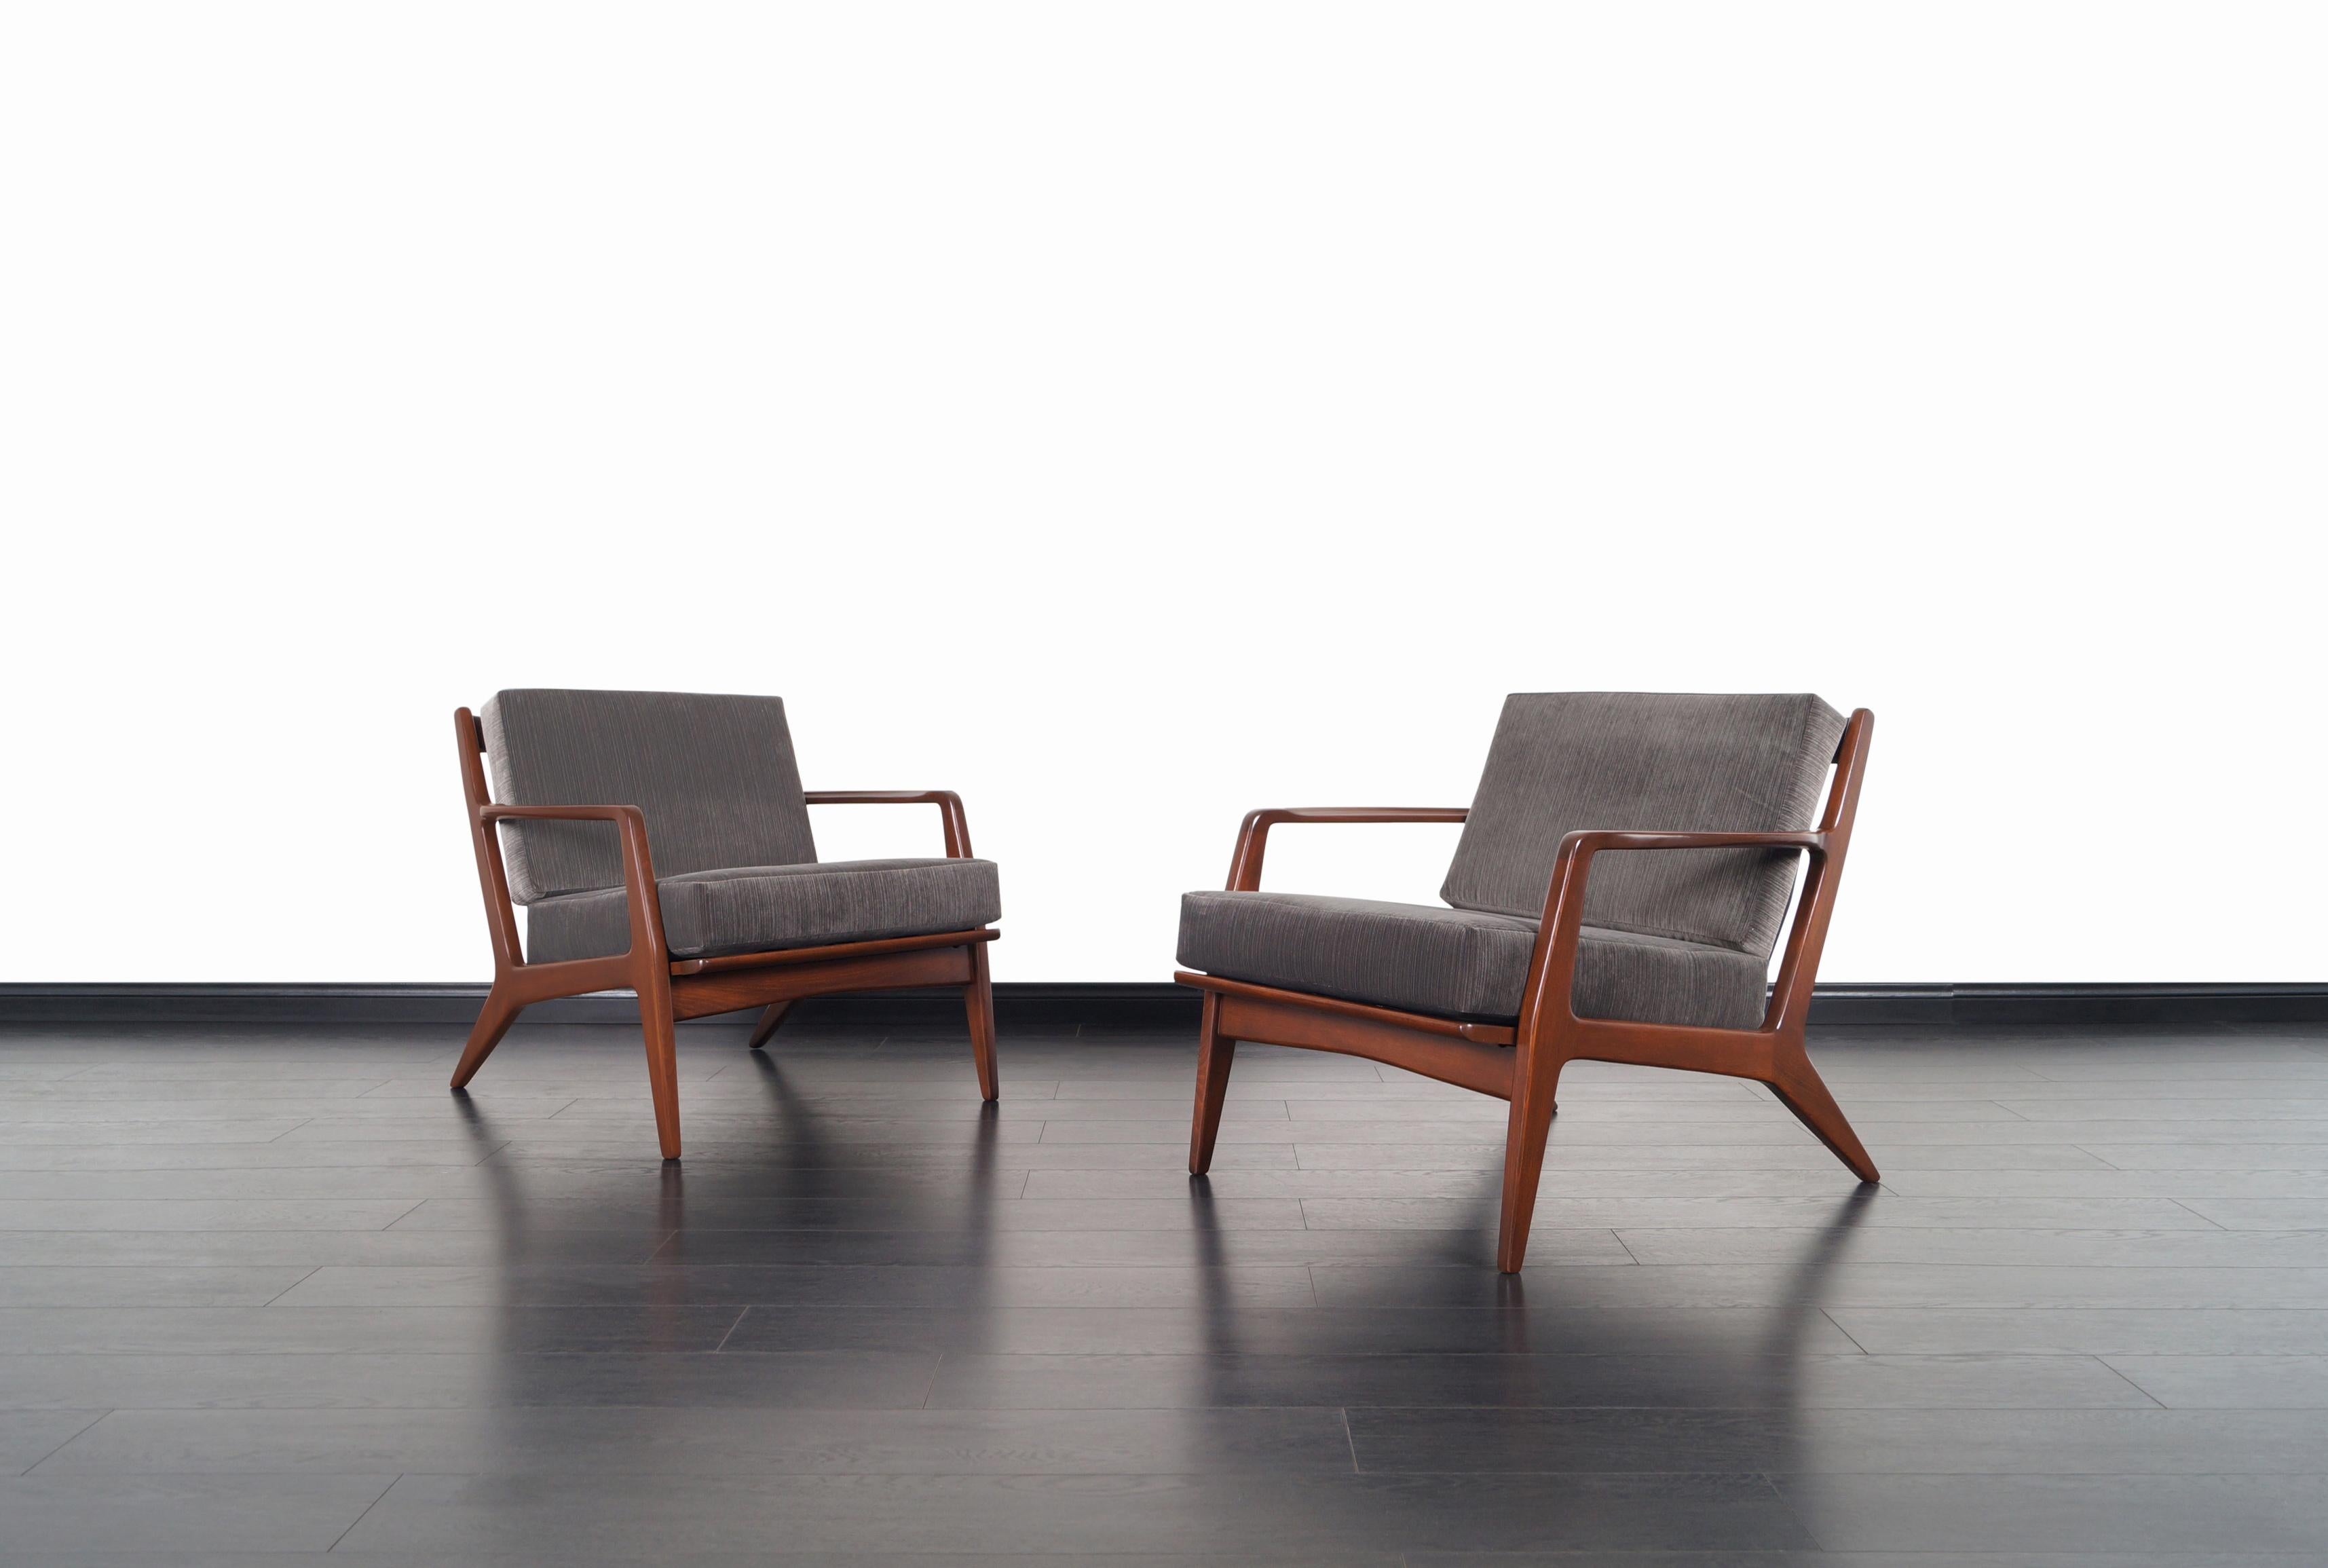 An amazing pair of Danish modern walnut lounge chairs designed by architect and furniture designer Ib Kofod-Larsen for Selig in Denmark, circa 1960s. These elegant ergonomic lounge chairs feature a solid walnut stained beech frame with angled legs